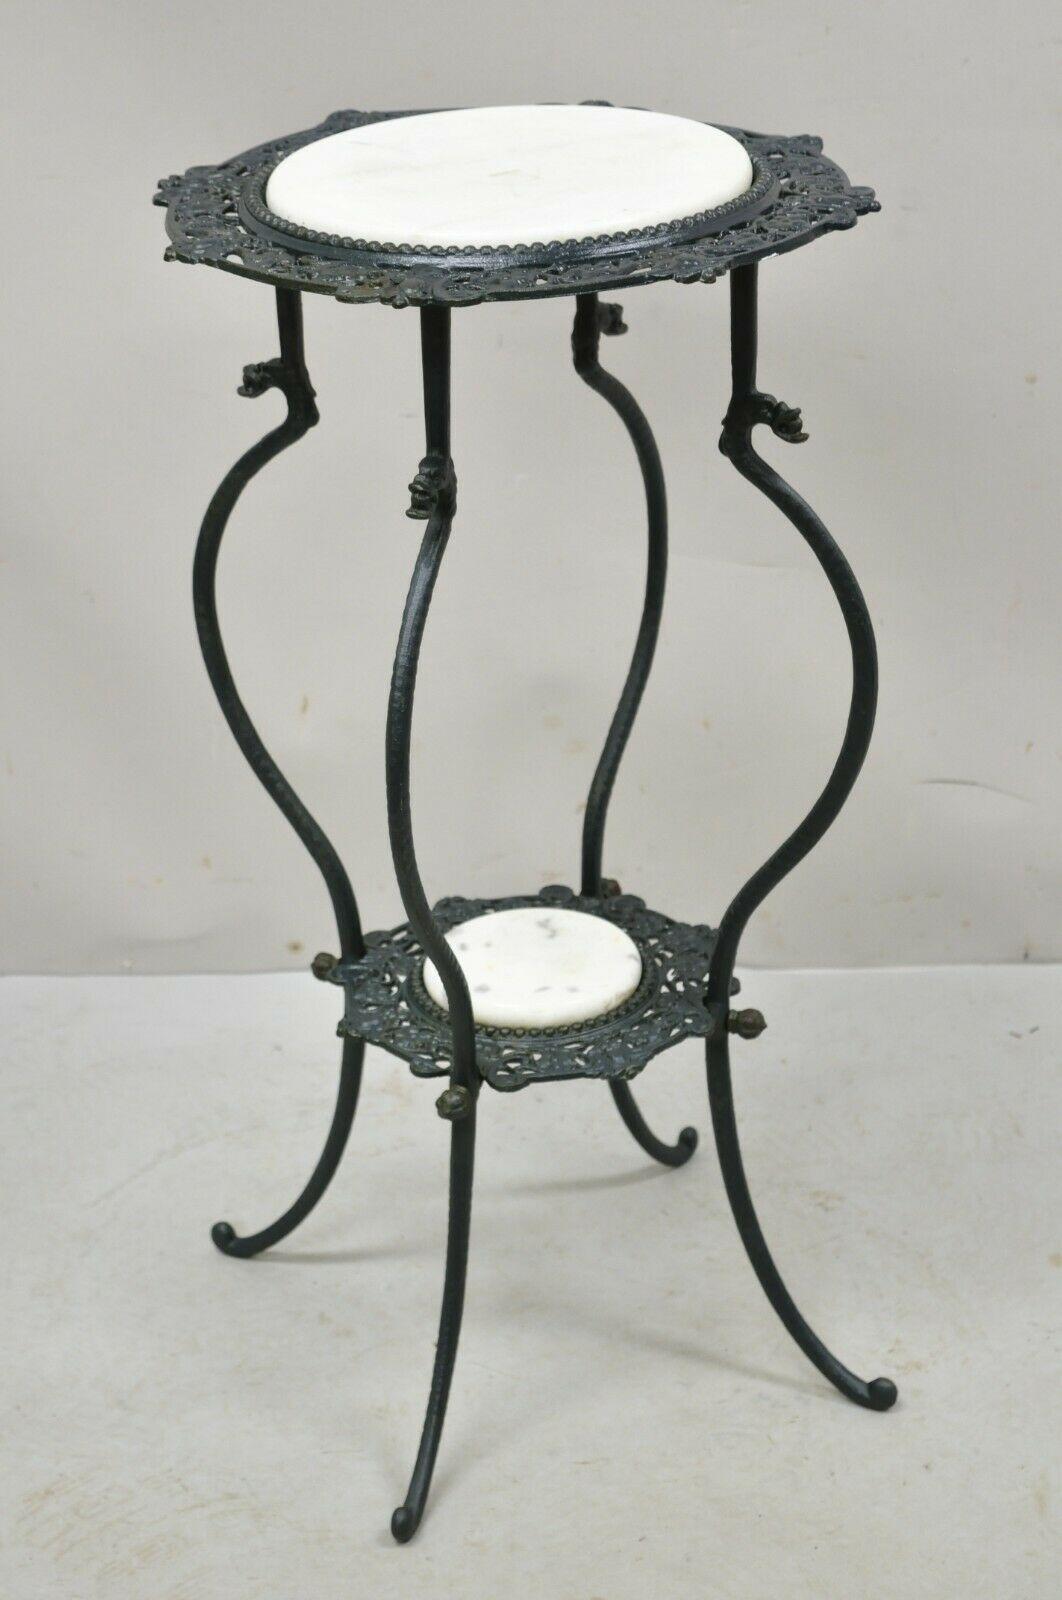 Vintage wrought iron 2 tier white round marble Victorian plant stand. Item features 2 tier of round marble, green painted finish, wrought iron construction, very nice vintage item, great style and form. Circa mid to late 20th century. Measurements: